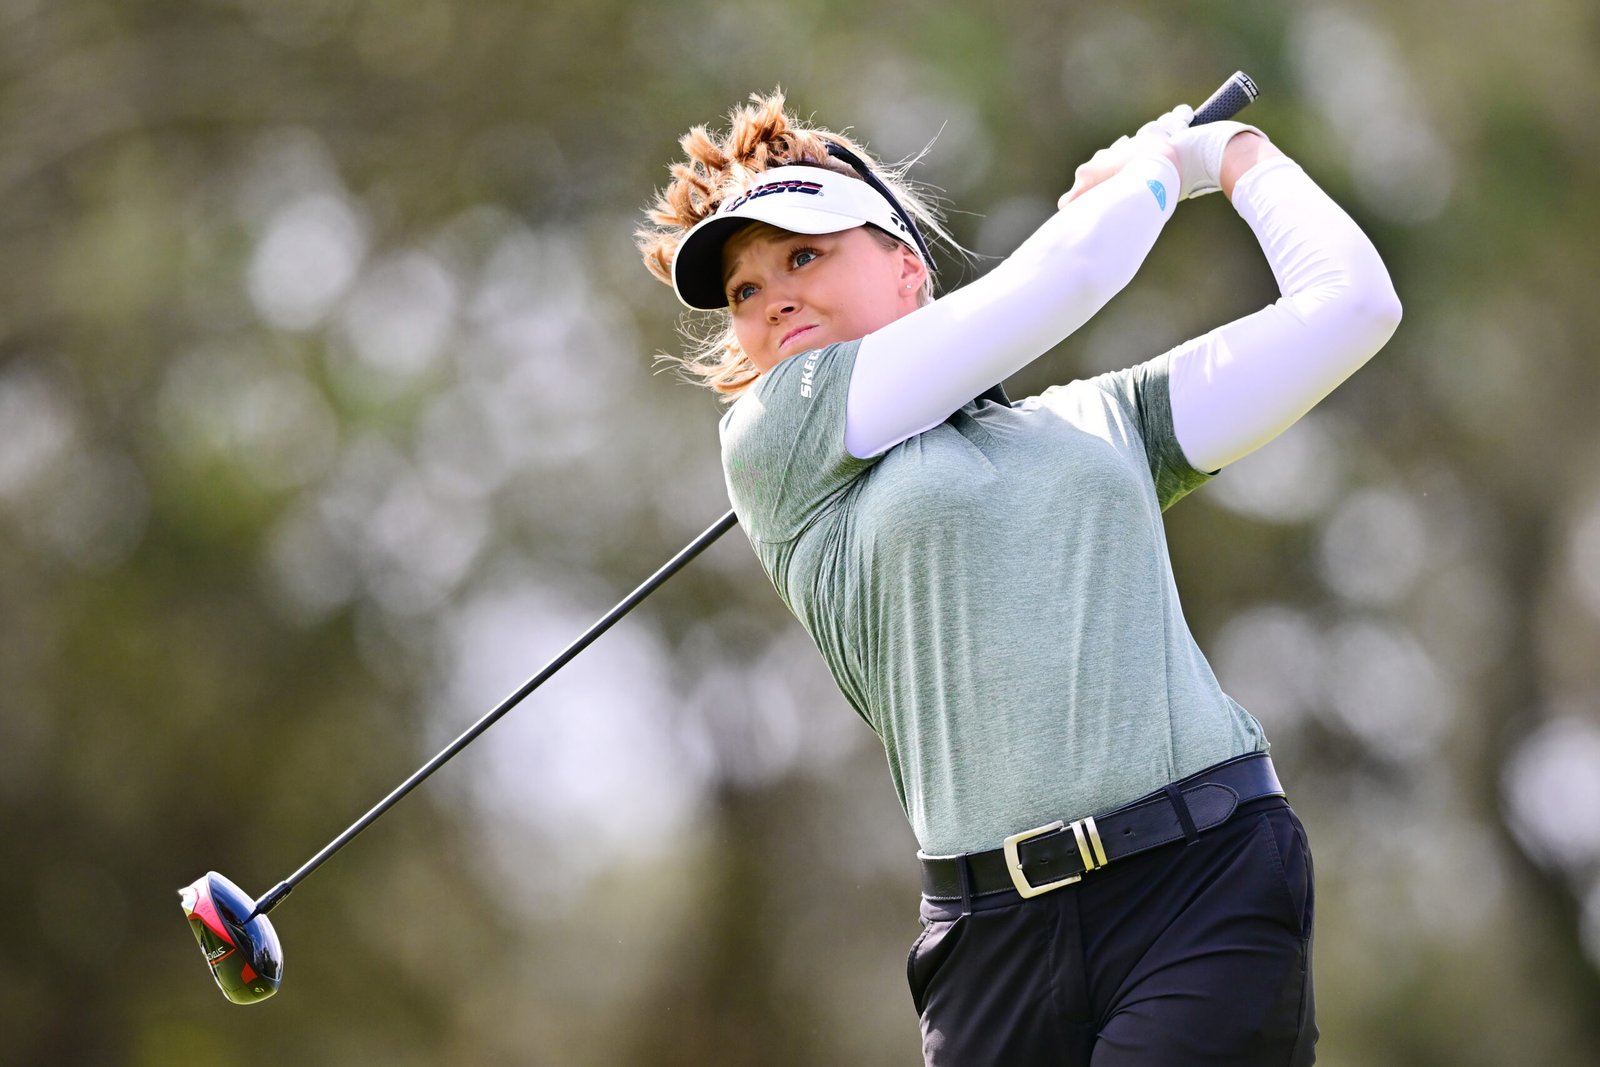 Brooke Henderson Goes Wire-to-Wire with Stealth 2 Plus Driver and Full Bag of TaylorMade Equipment to Win Hilton Grand Vacations Tournament of Champions